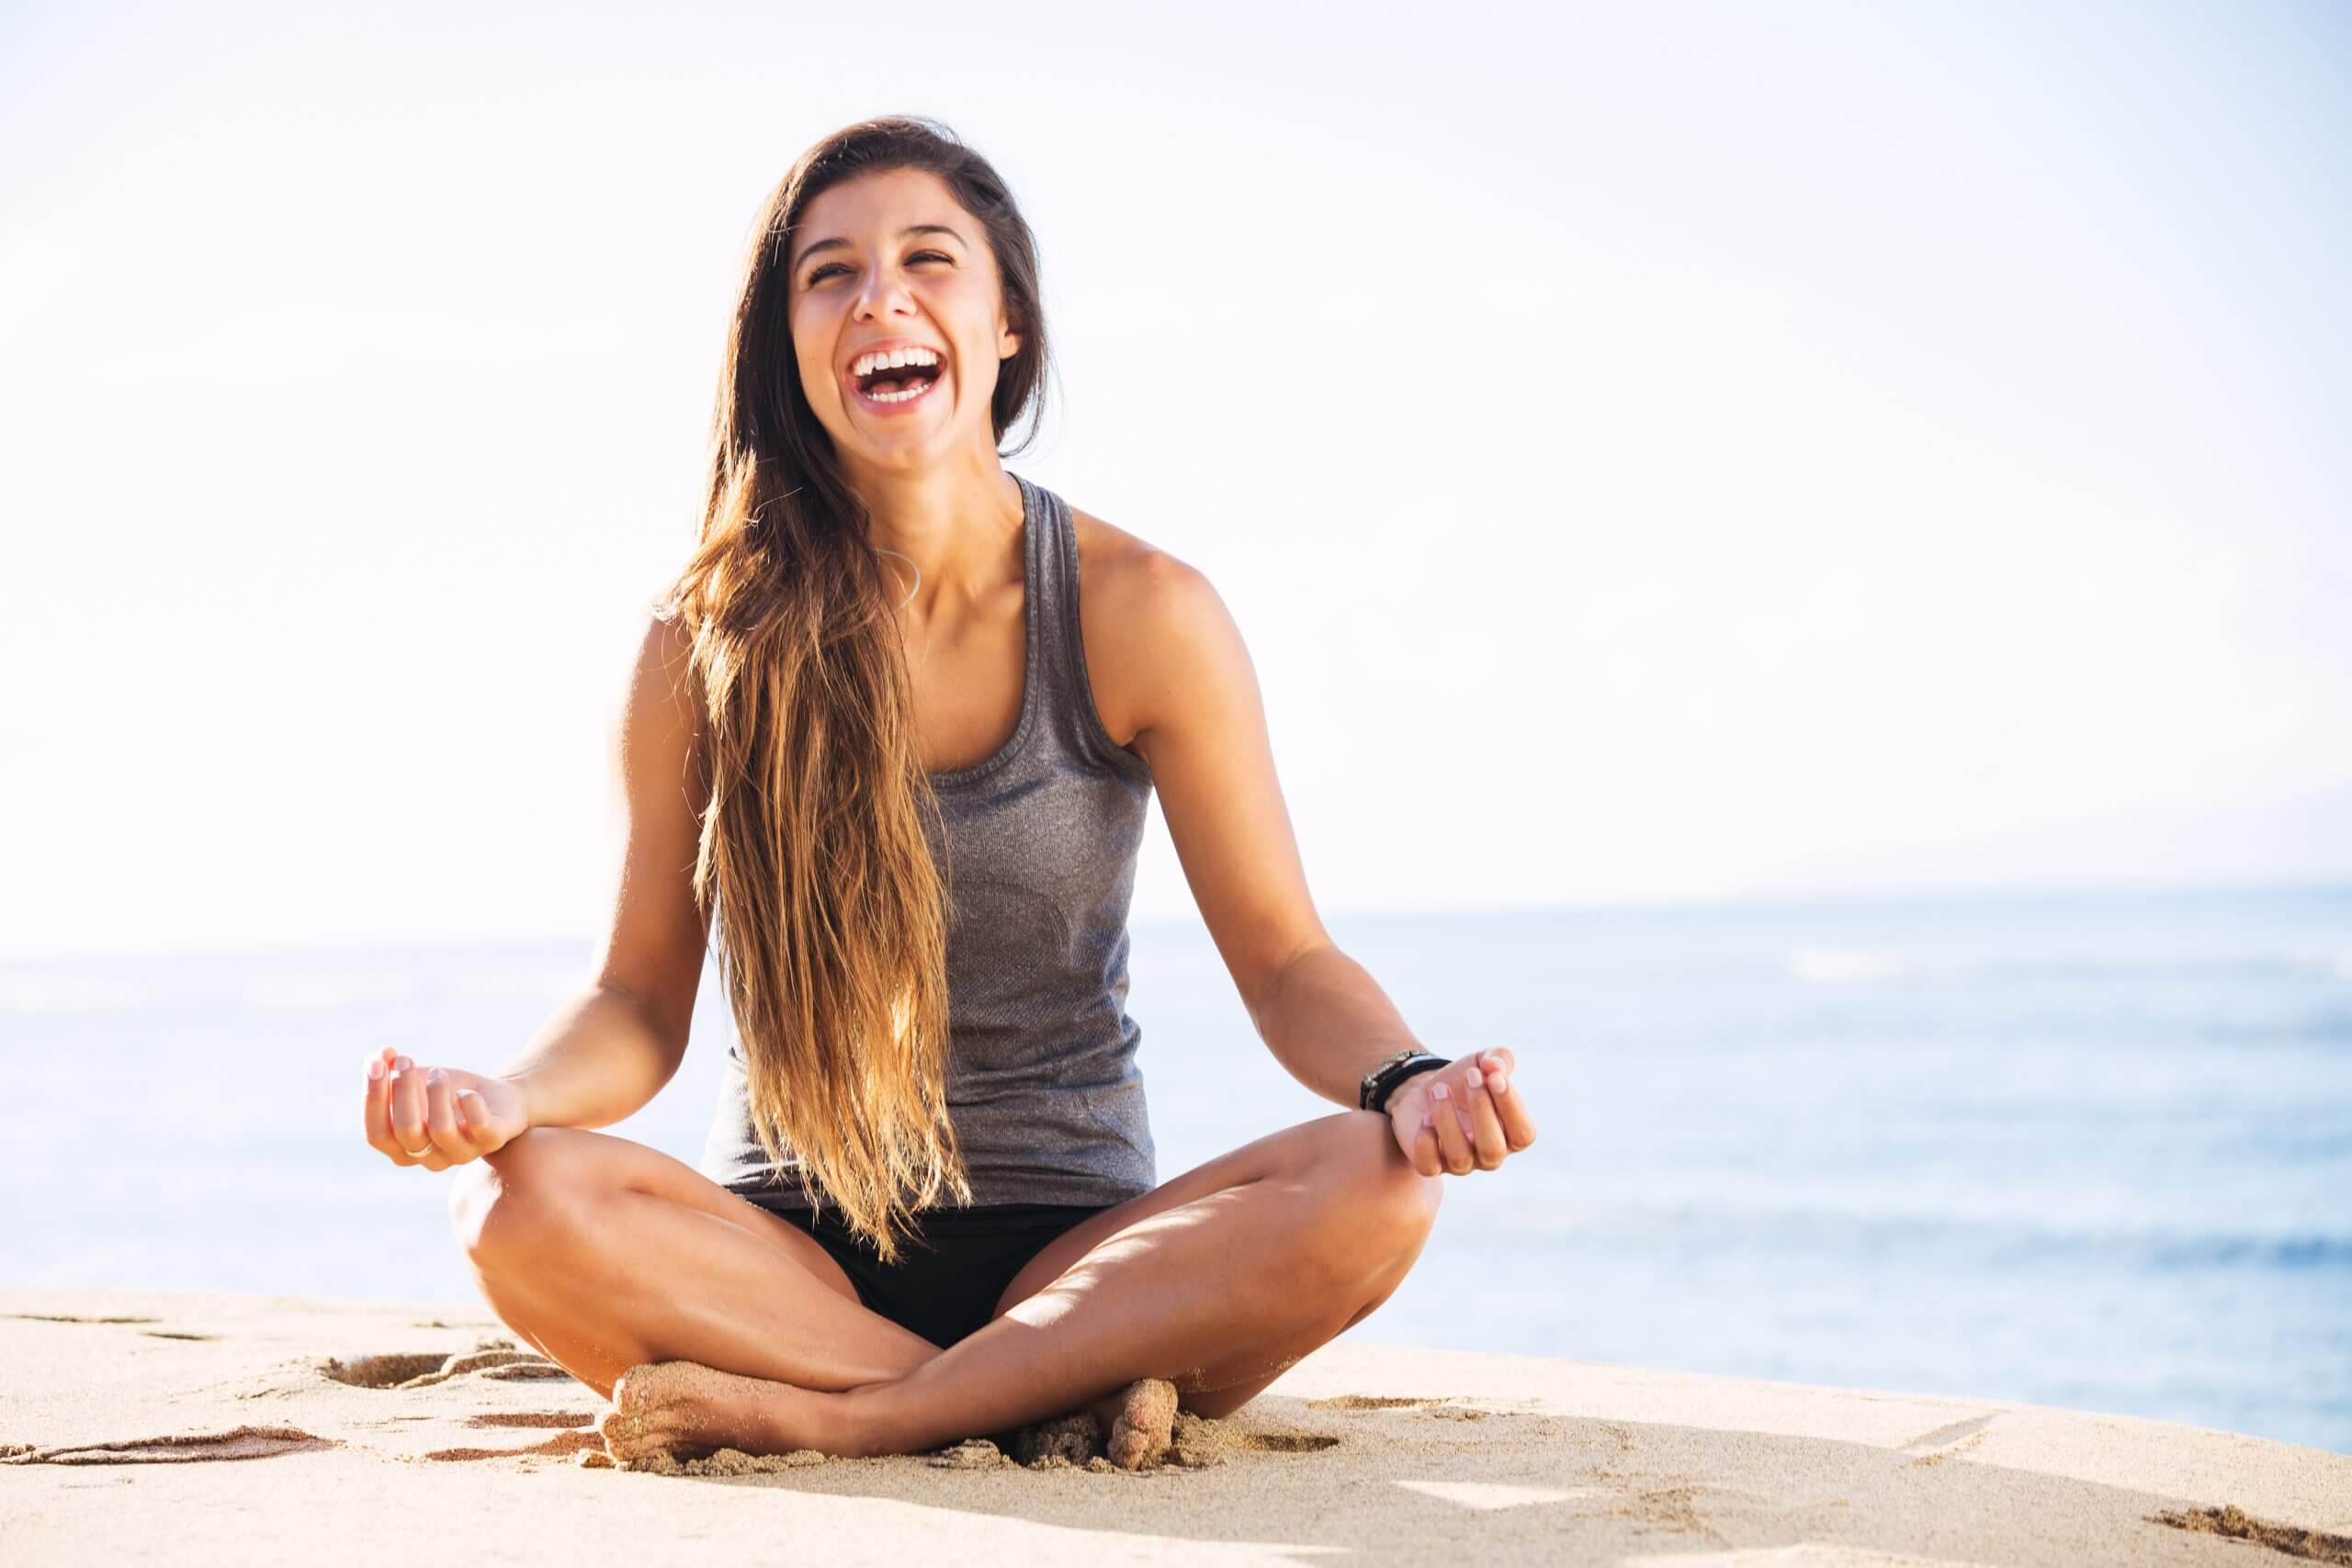 Laughing woman sitting on the beach to meditate and restore energy balance.